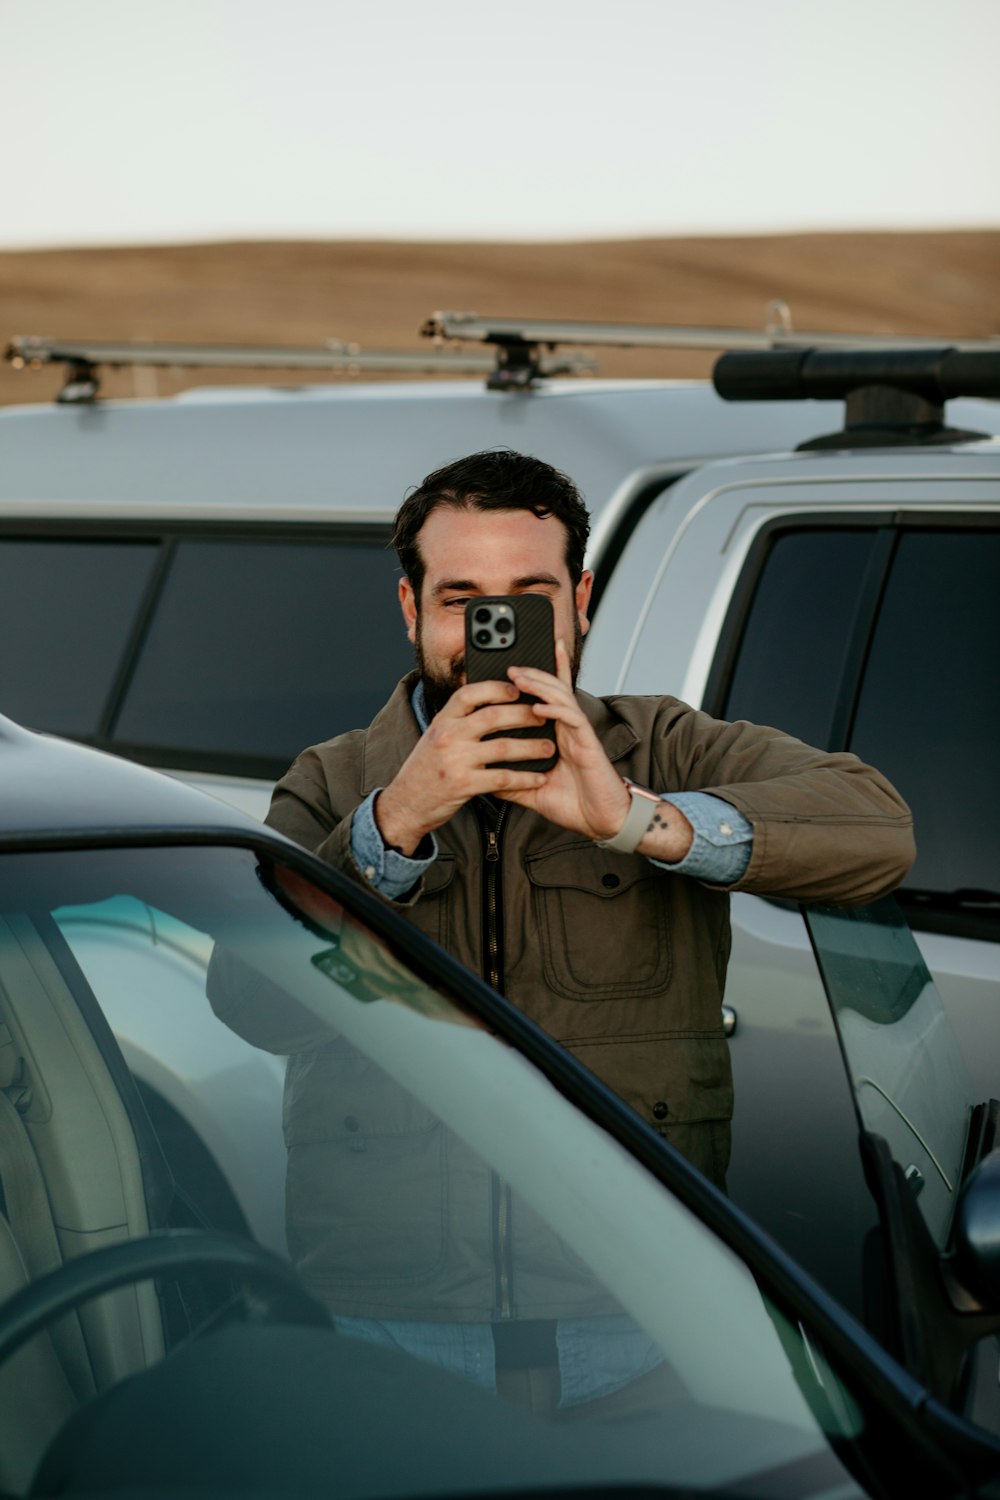 a man taking a picture of himself in a car